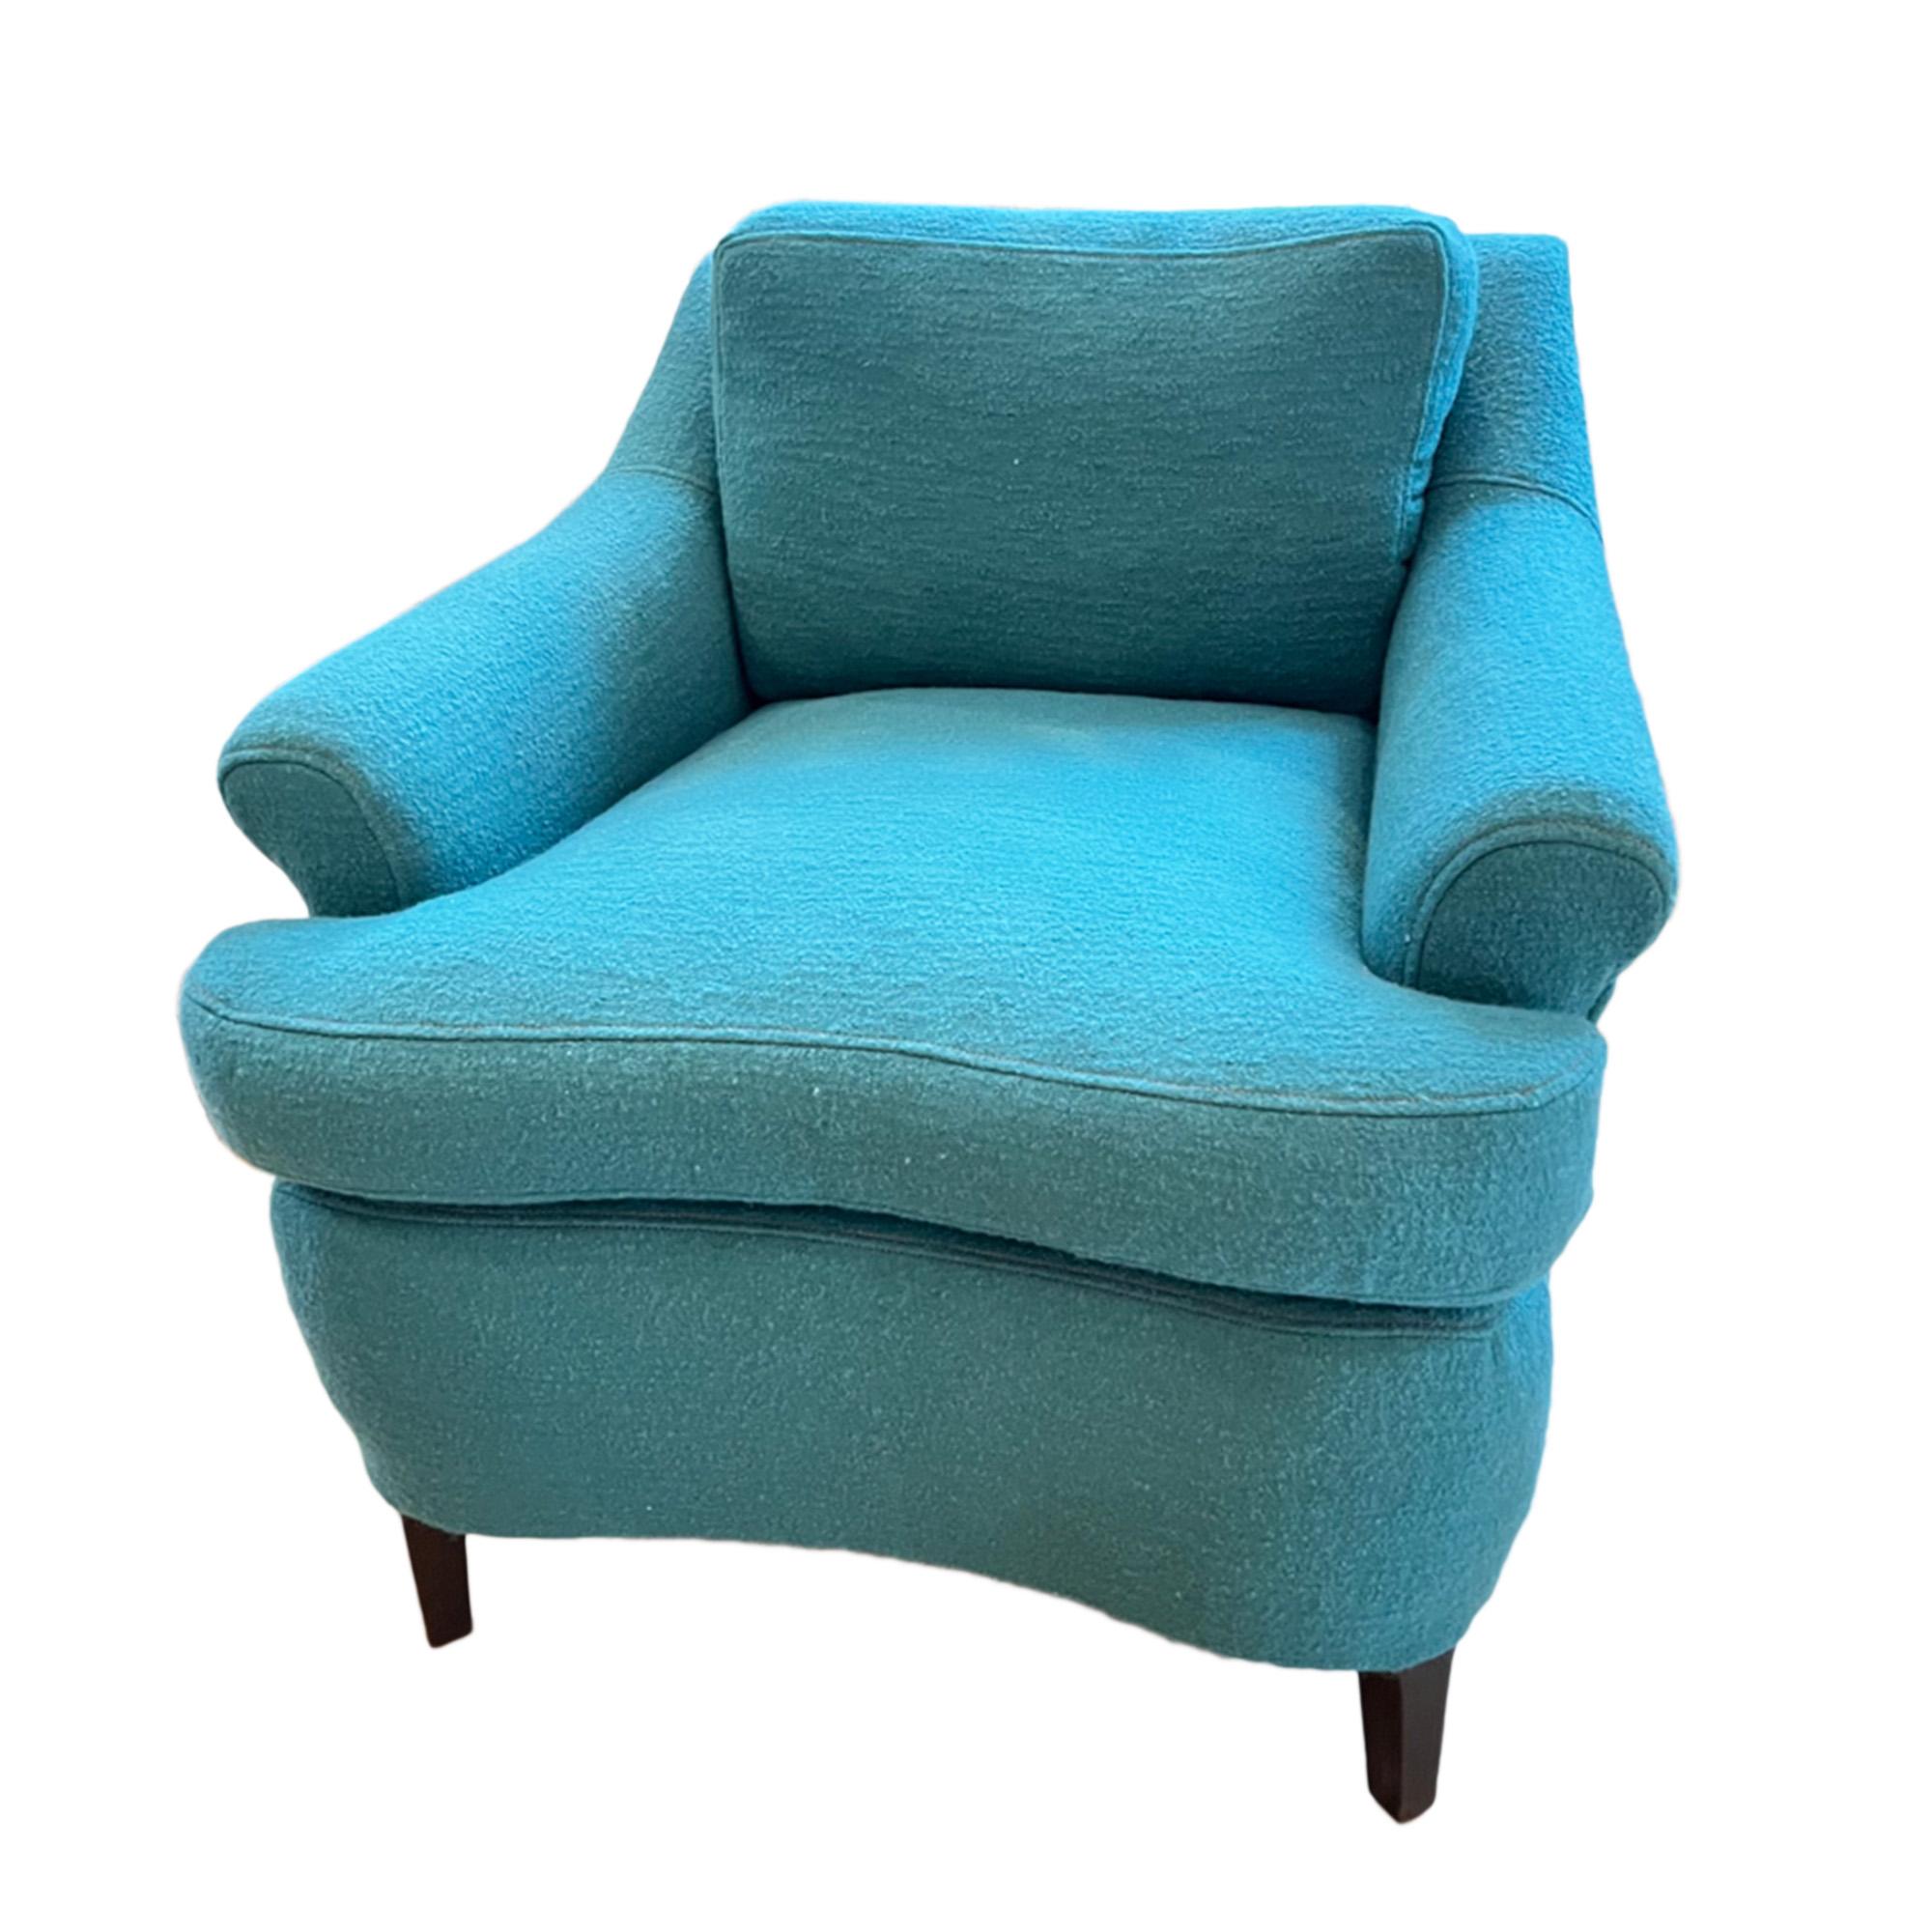 This beautiful armchair has been expertly covered in 'Orkney - Pine' from the Isle Mill. This is what they say about the fabric:

'Orkney is a beautifully textural boucle collection with an extensive offering of vibrant colours ways in blues, reds,